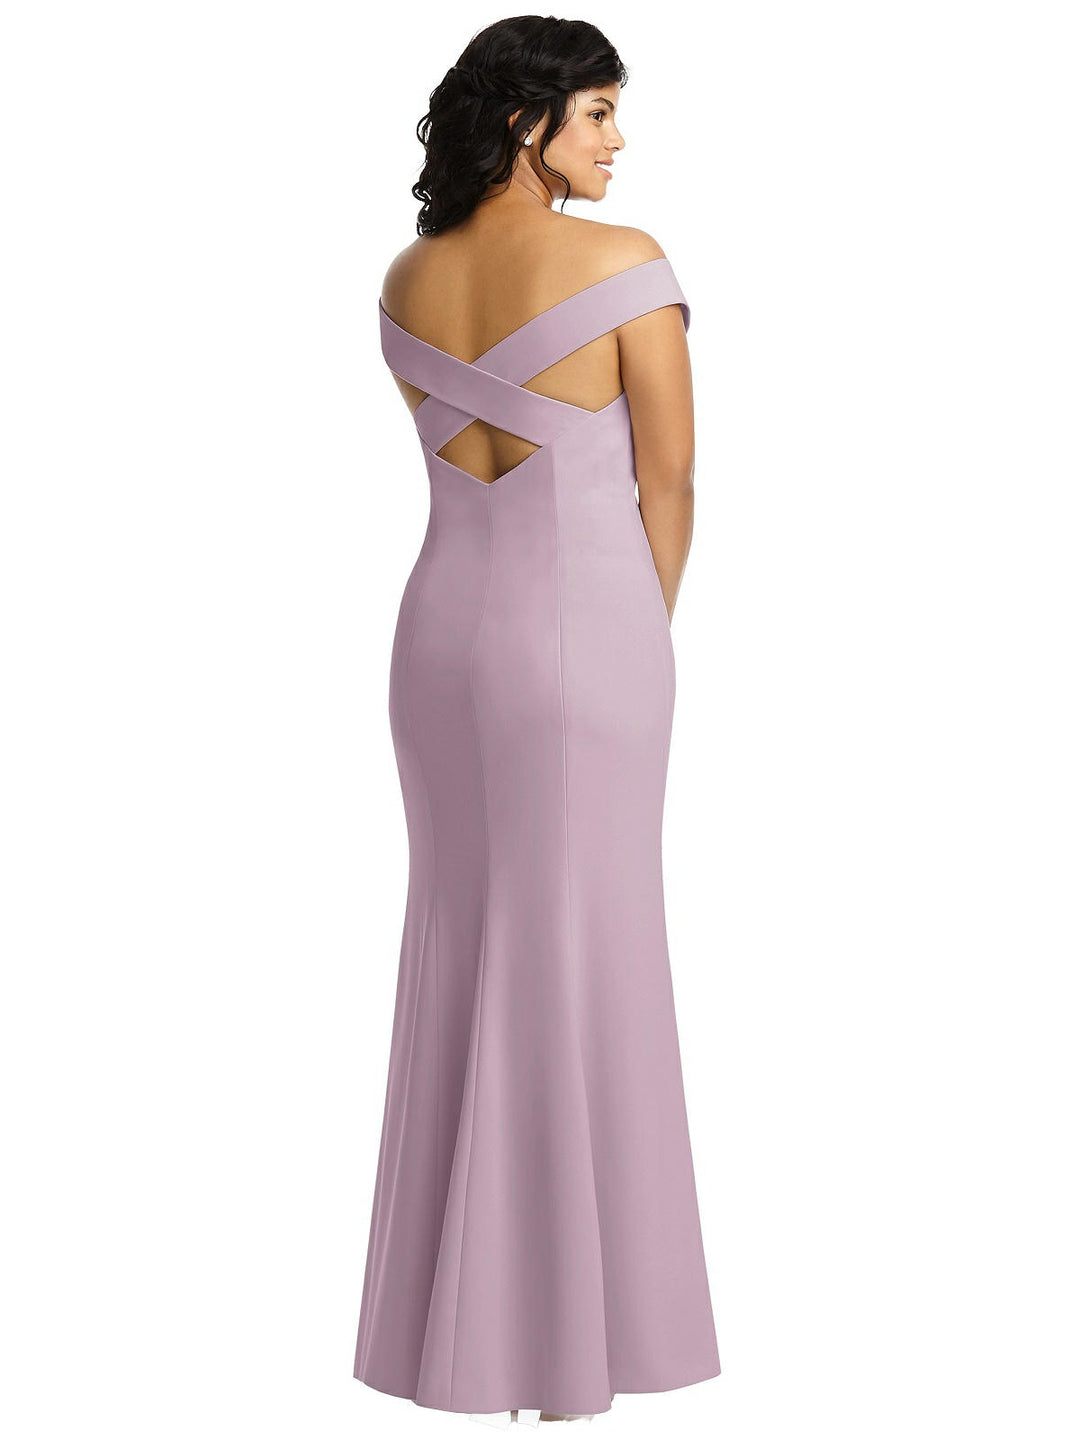 Off-the-Shoulder Criss Cross Back Trumpet Gown Style 3012 Size 12